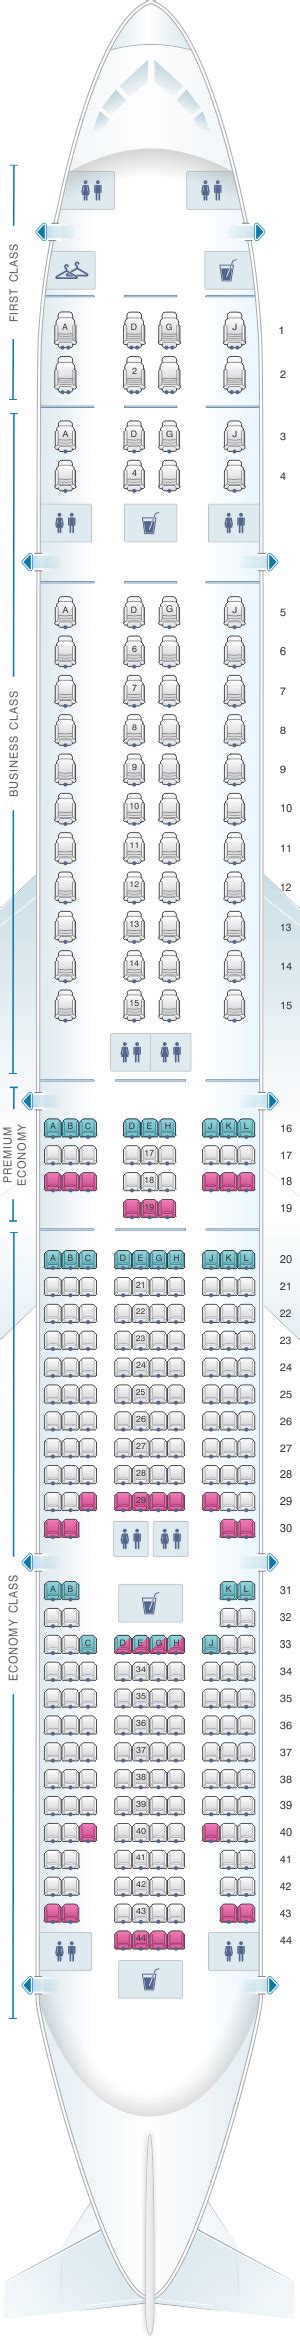 Boeing 777 300er seat map american airlines - 2. Flagship first class on the 777-300ER. Seat Design: Safran Flagship First. One might assume that first class would rank higher than business class, but many AA flyers I've spoken with prefer the business-class seat on AA's 777-300ER to the first-class seat. That said, the first-class seat is still great.